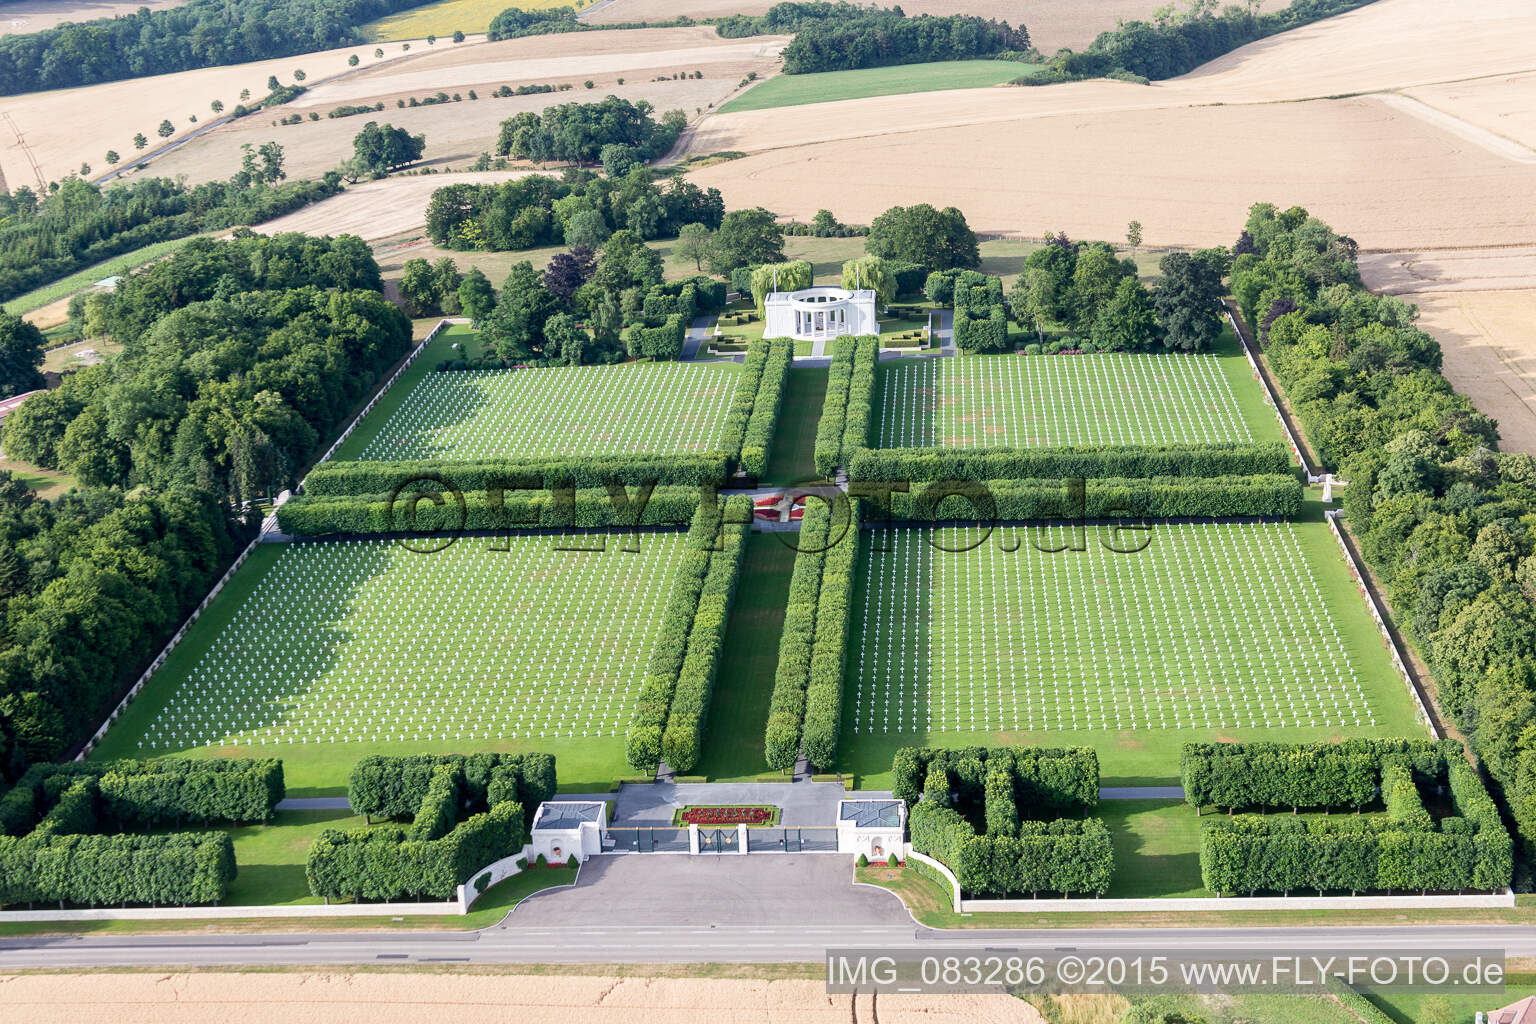 Grave rows on the grounds of the American Cemetery Saint Mihiel in Thiaucourt-Regnieville in Grand Est, France from above